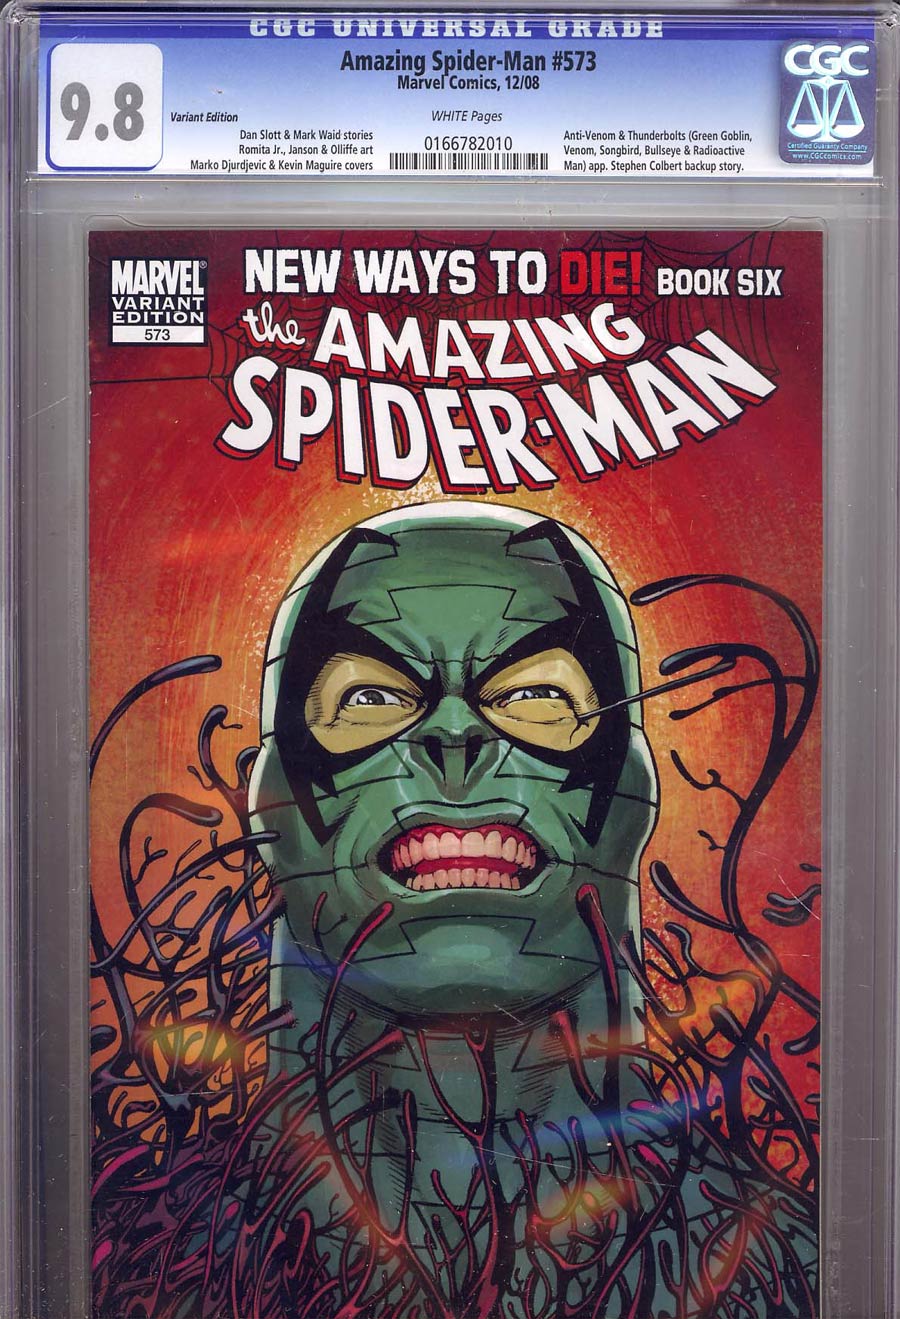 Amazing Spider-Man Vol 2 #573 Variant Kevin Maguire Cover CGC 9.8